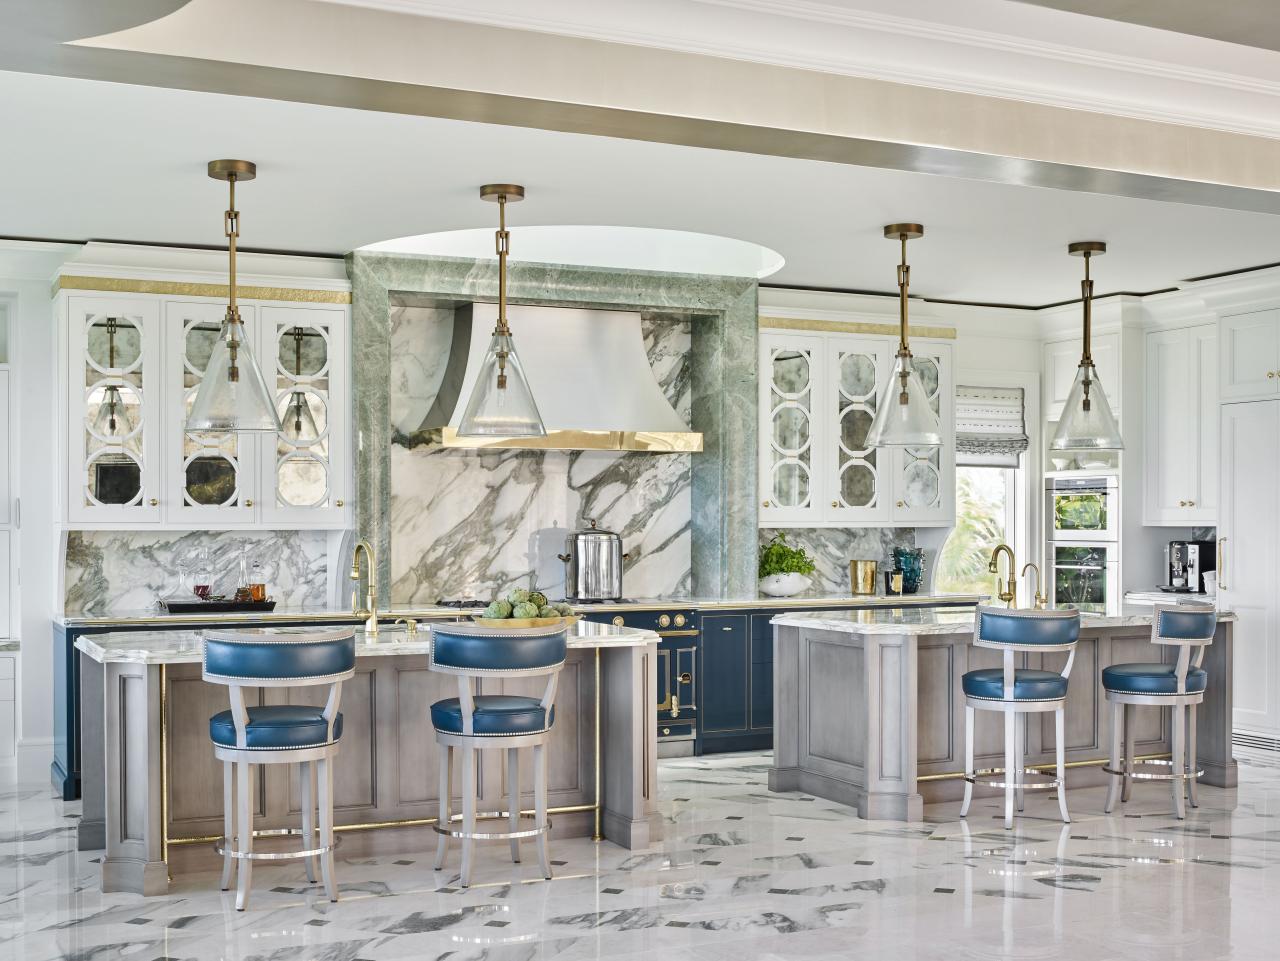 luxury marble designed kitchen with gold accents highlighting the faucets and counters